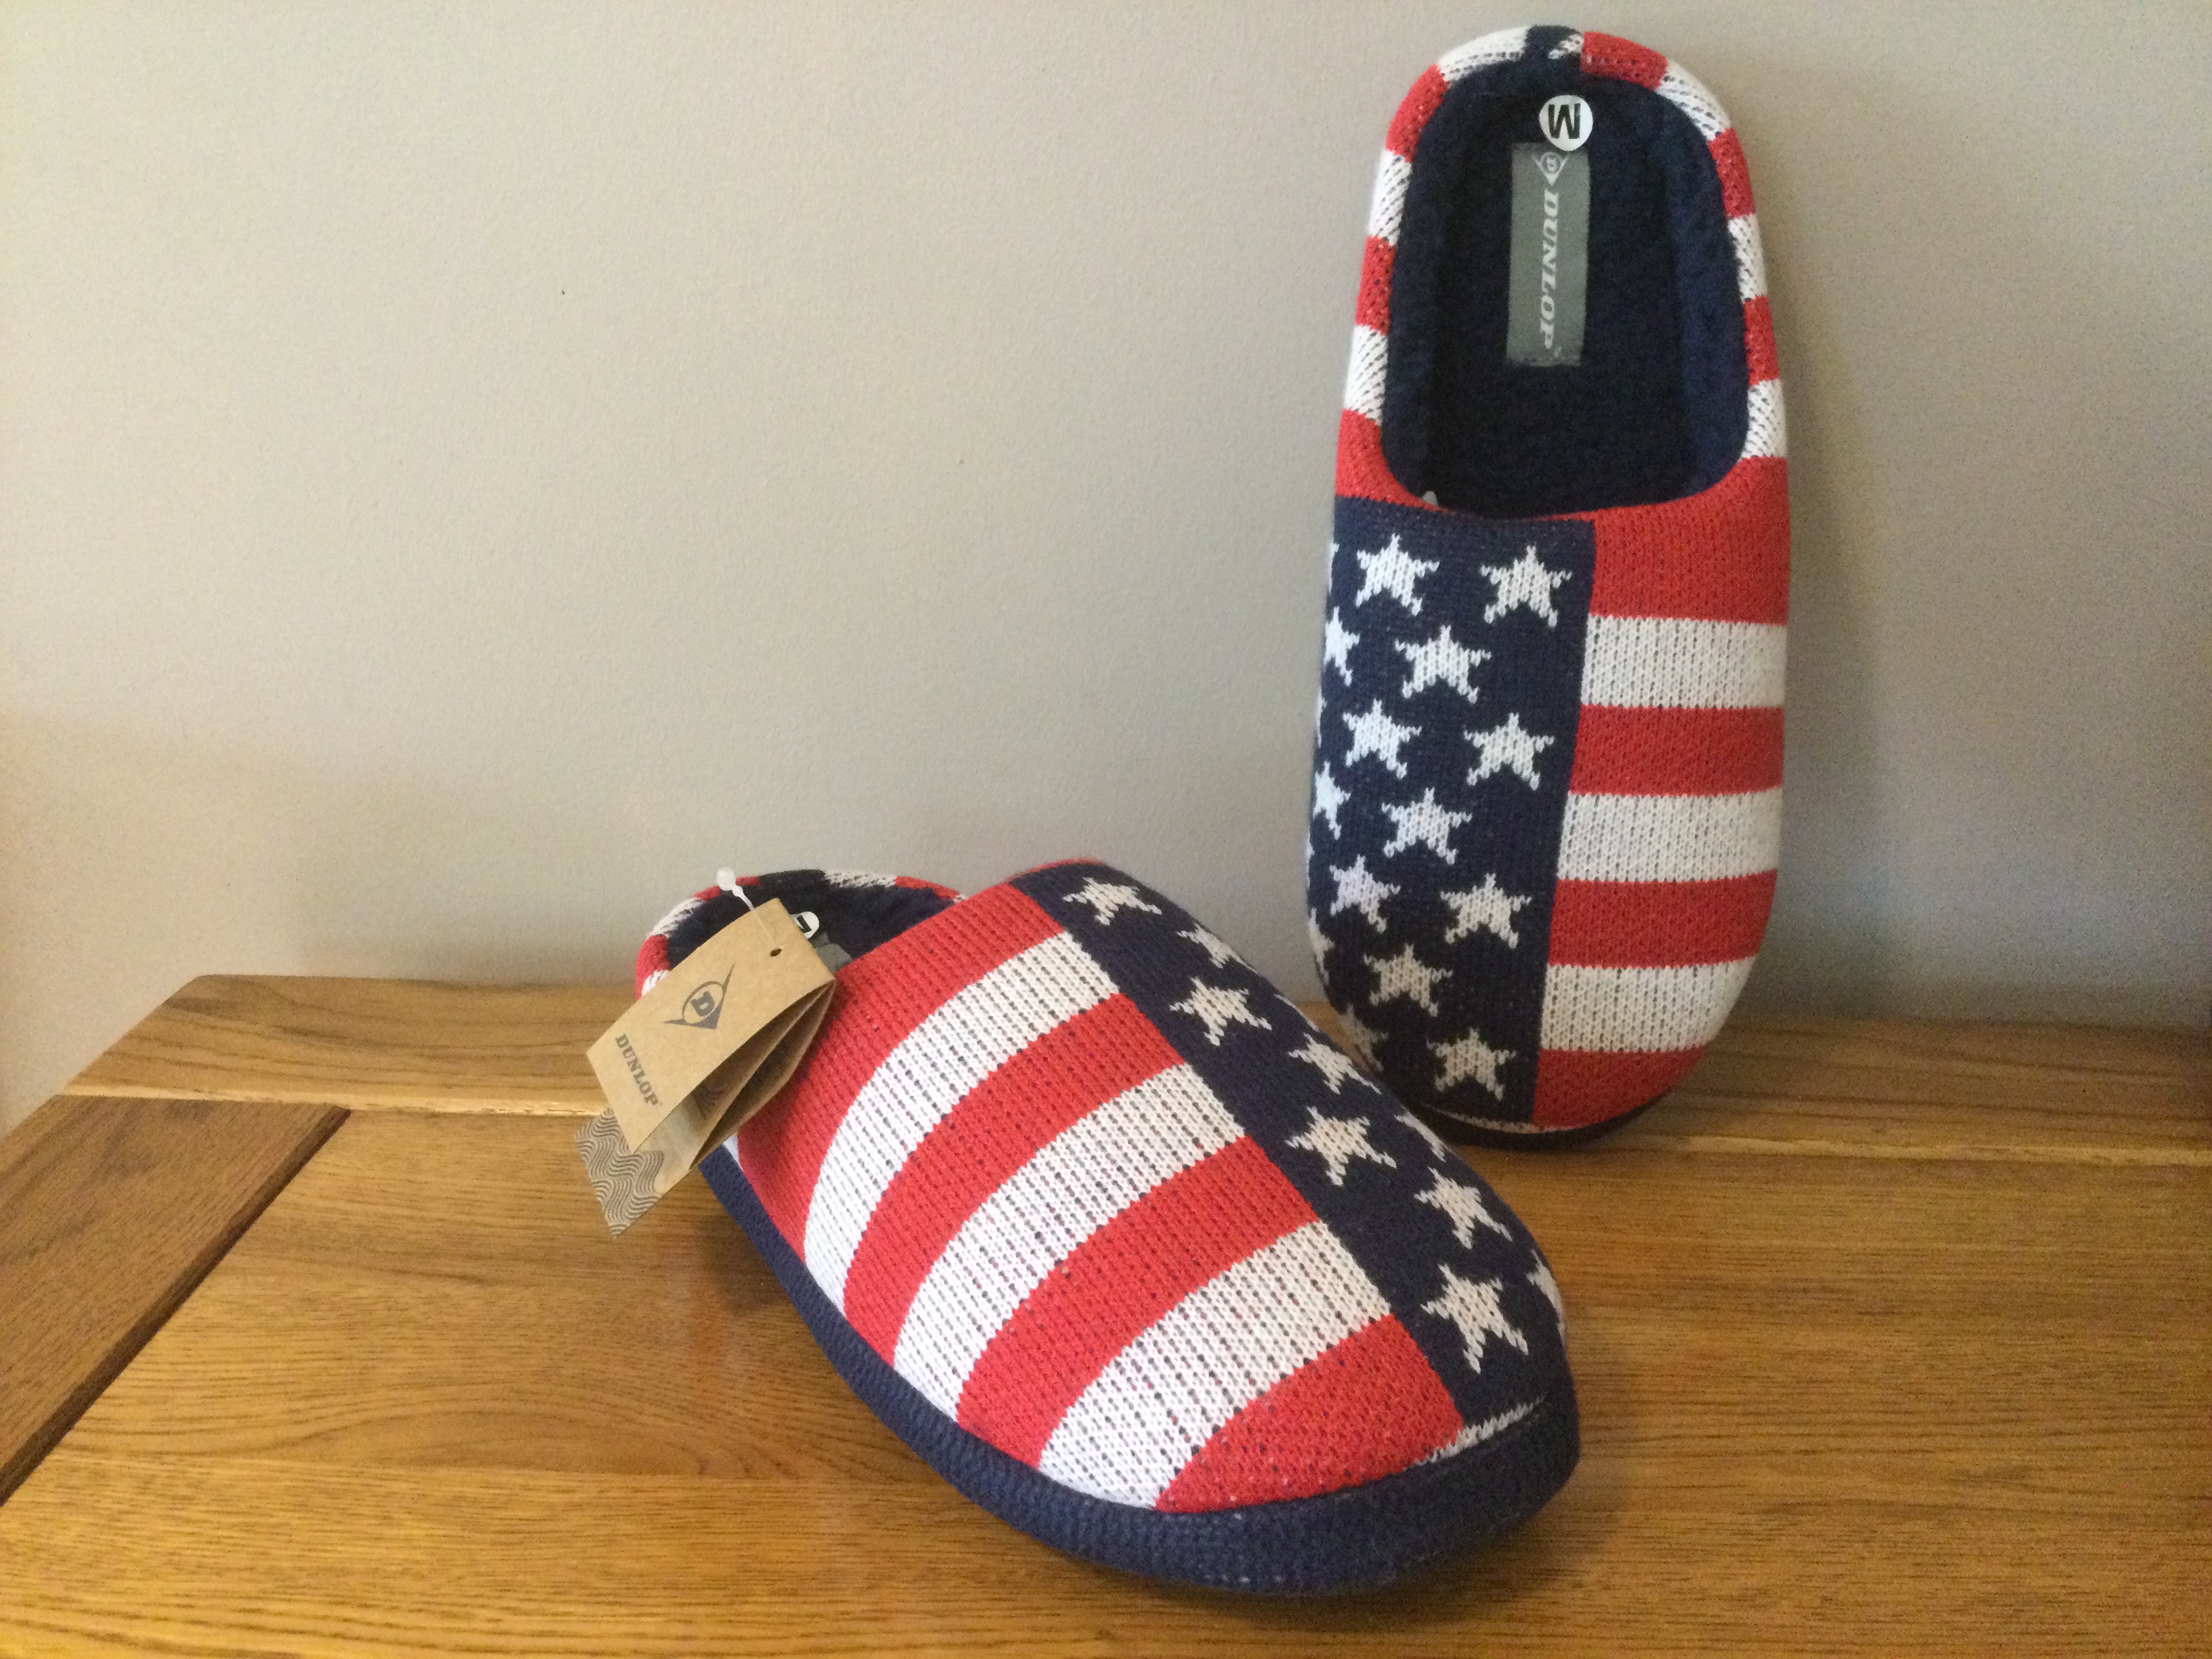 Men's Dunlop, “USA Stars and Stripes” Memory Foam, Mule Slippers, Size M (8/9) - New - Image 5 of 5